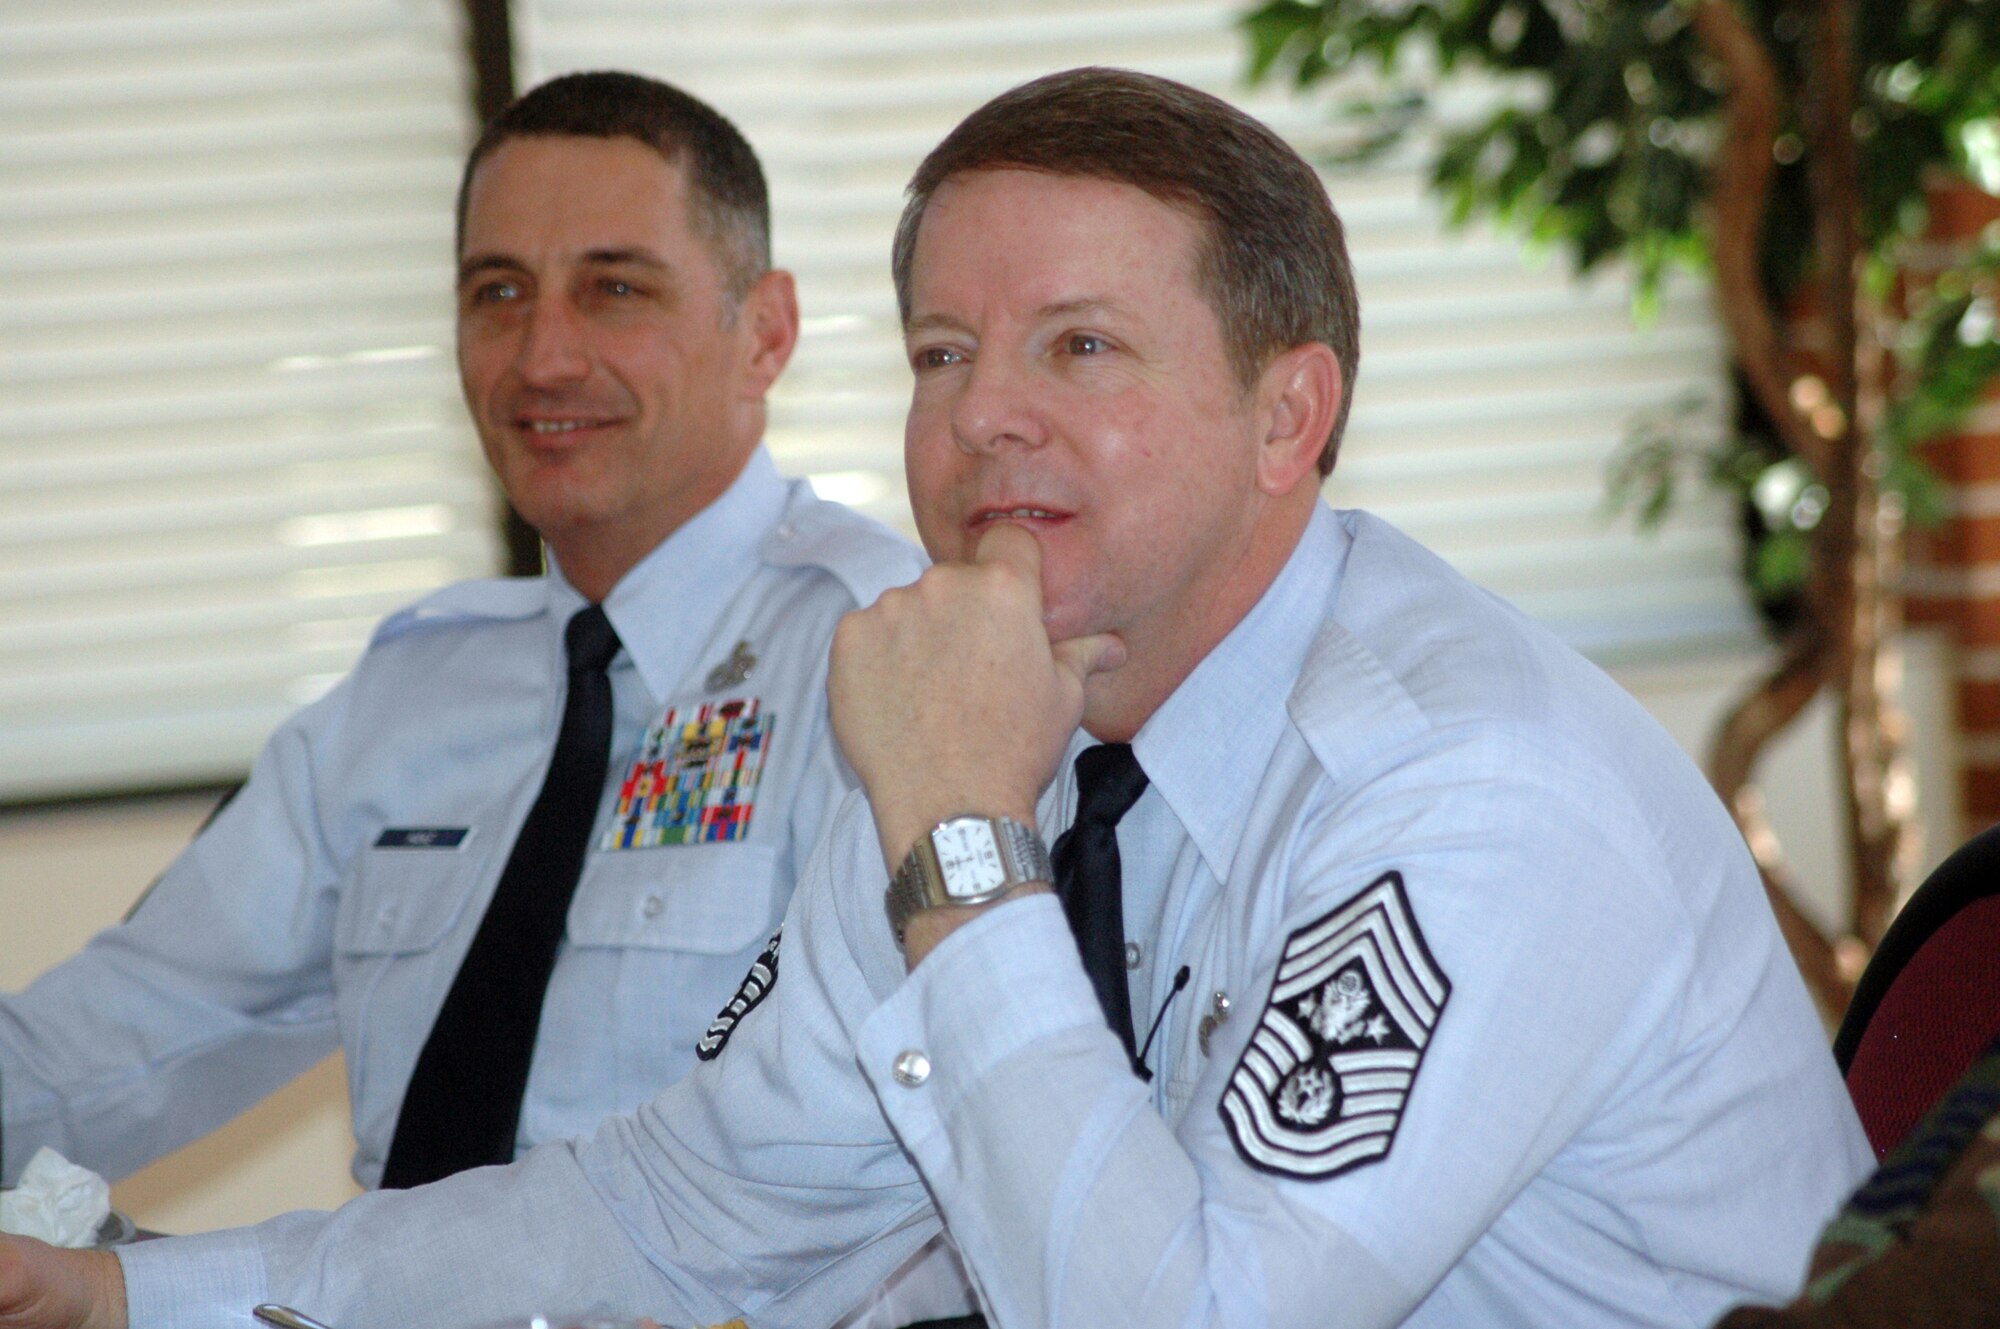 Chief McKinley, right, and Air Force Materiel Command Chief Master Sgt. Jonathan Hake respond to questions from Airmen. U.S. Air Force photo by Sue Sapp.